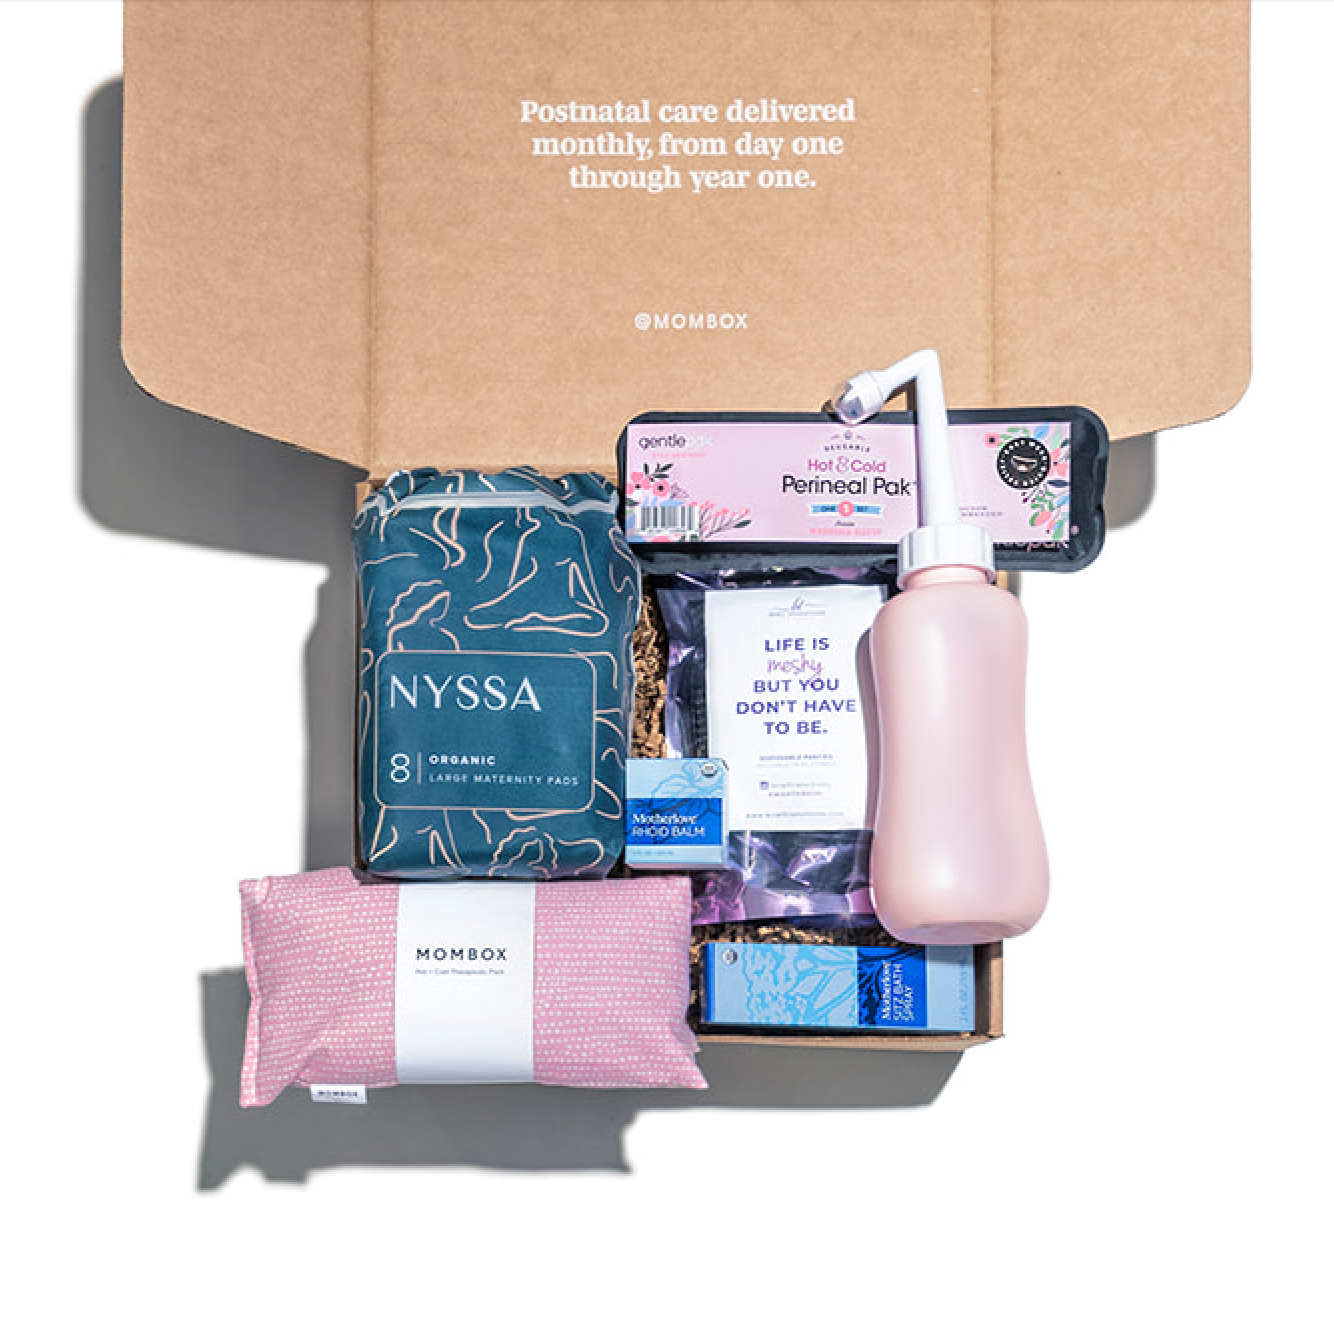 The #1 Labor & Delivery Kit for New Moms – MOMBOX